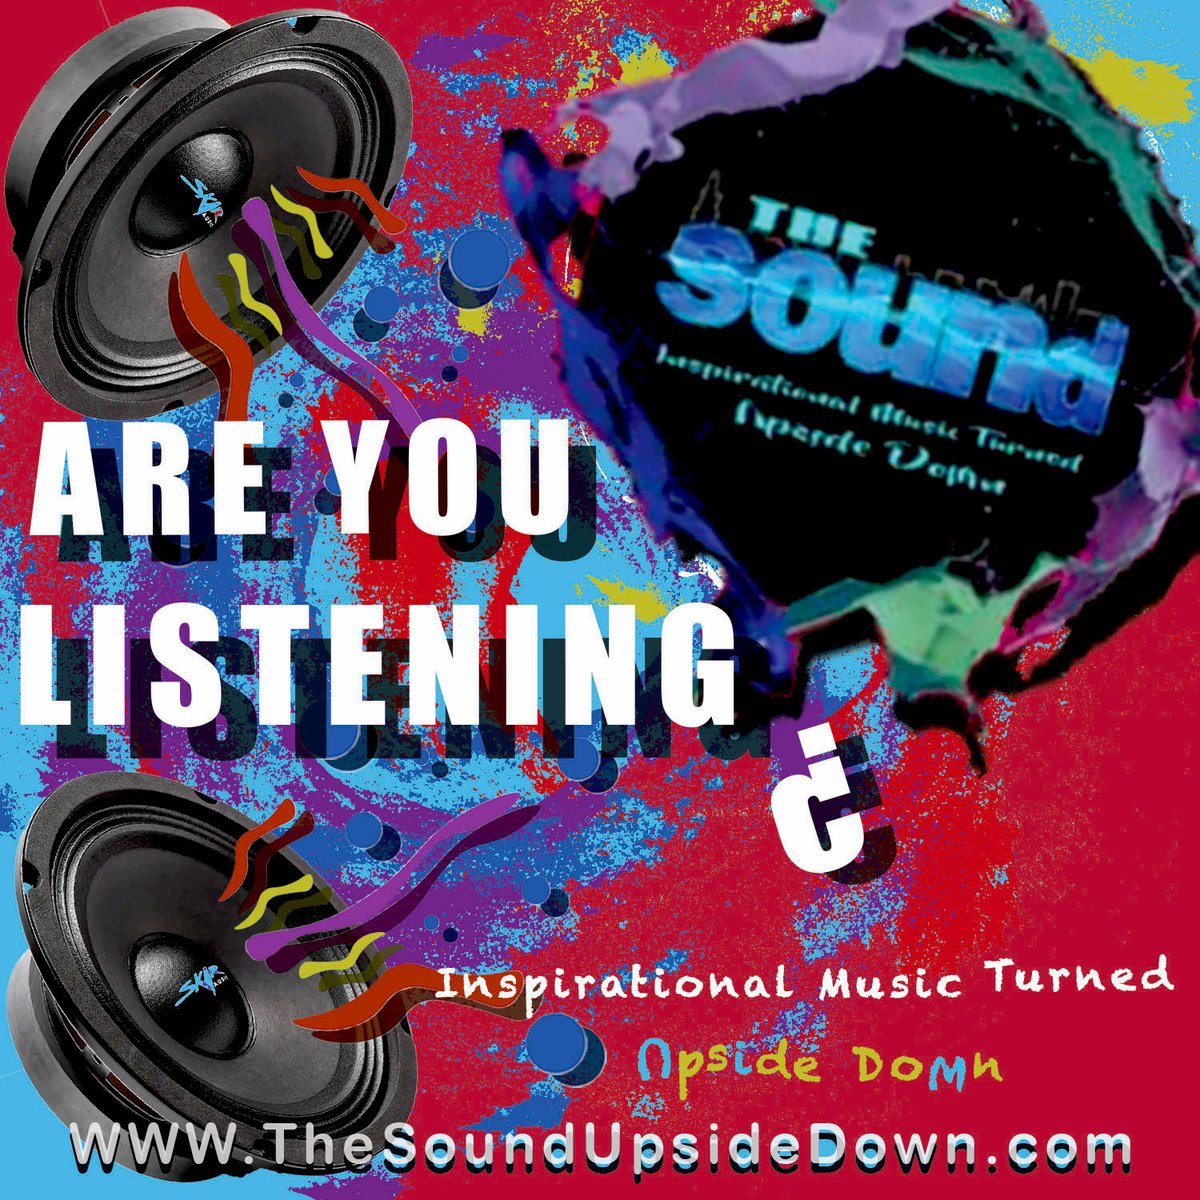 Log on NOW to vibe with the dopest hop hop, rap, and R&B!!!

TheSoundUpsideDown.com and click LISTEN LIVE!!!!!! Don't miss it!!!!!!

#hiphop #rap #RnB #chh #christianhiphop #gospelrap #allthehits #music #listenlive #bestmusic #alldaylong #everyday #wednesday #wednesdaymusic